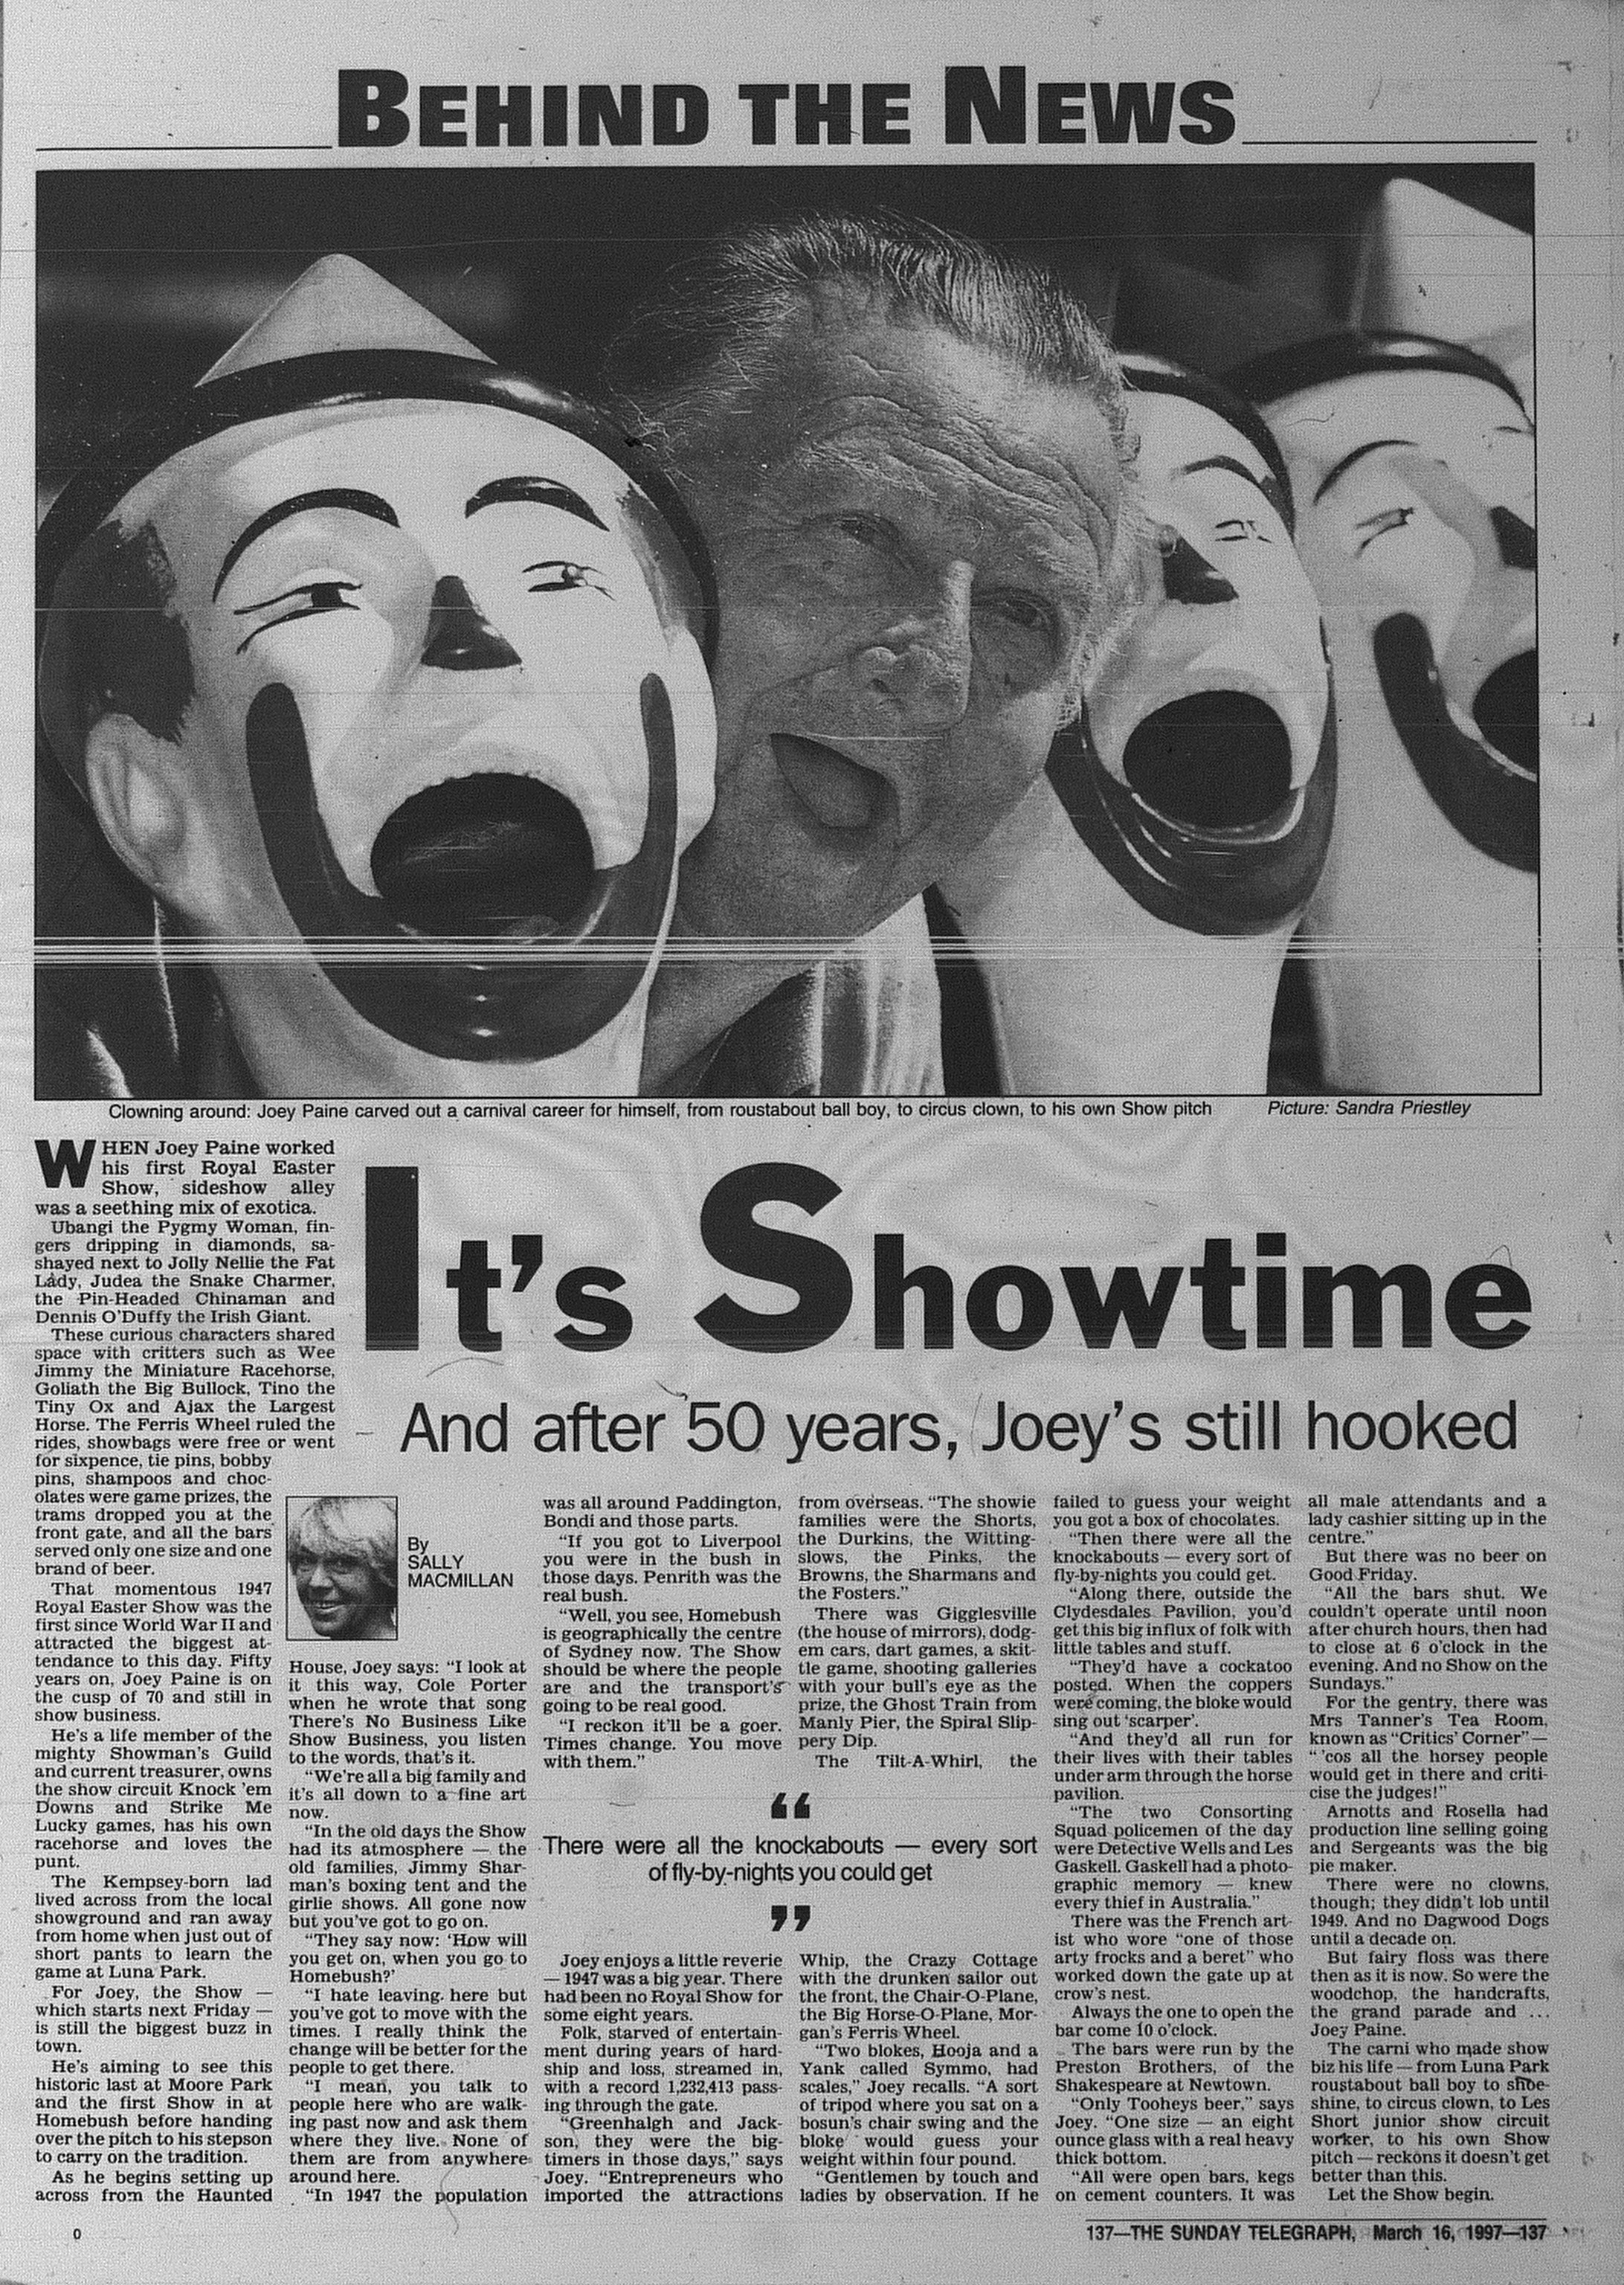 Royal Easter Show March 16 1997 sunday telegraph 137